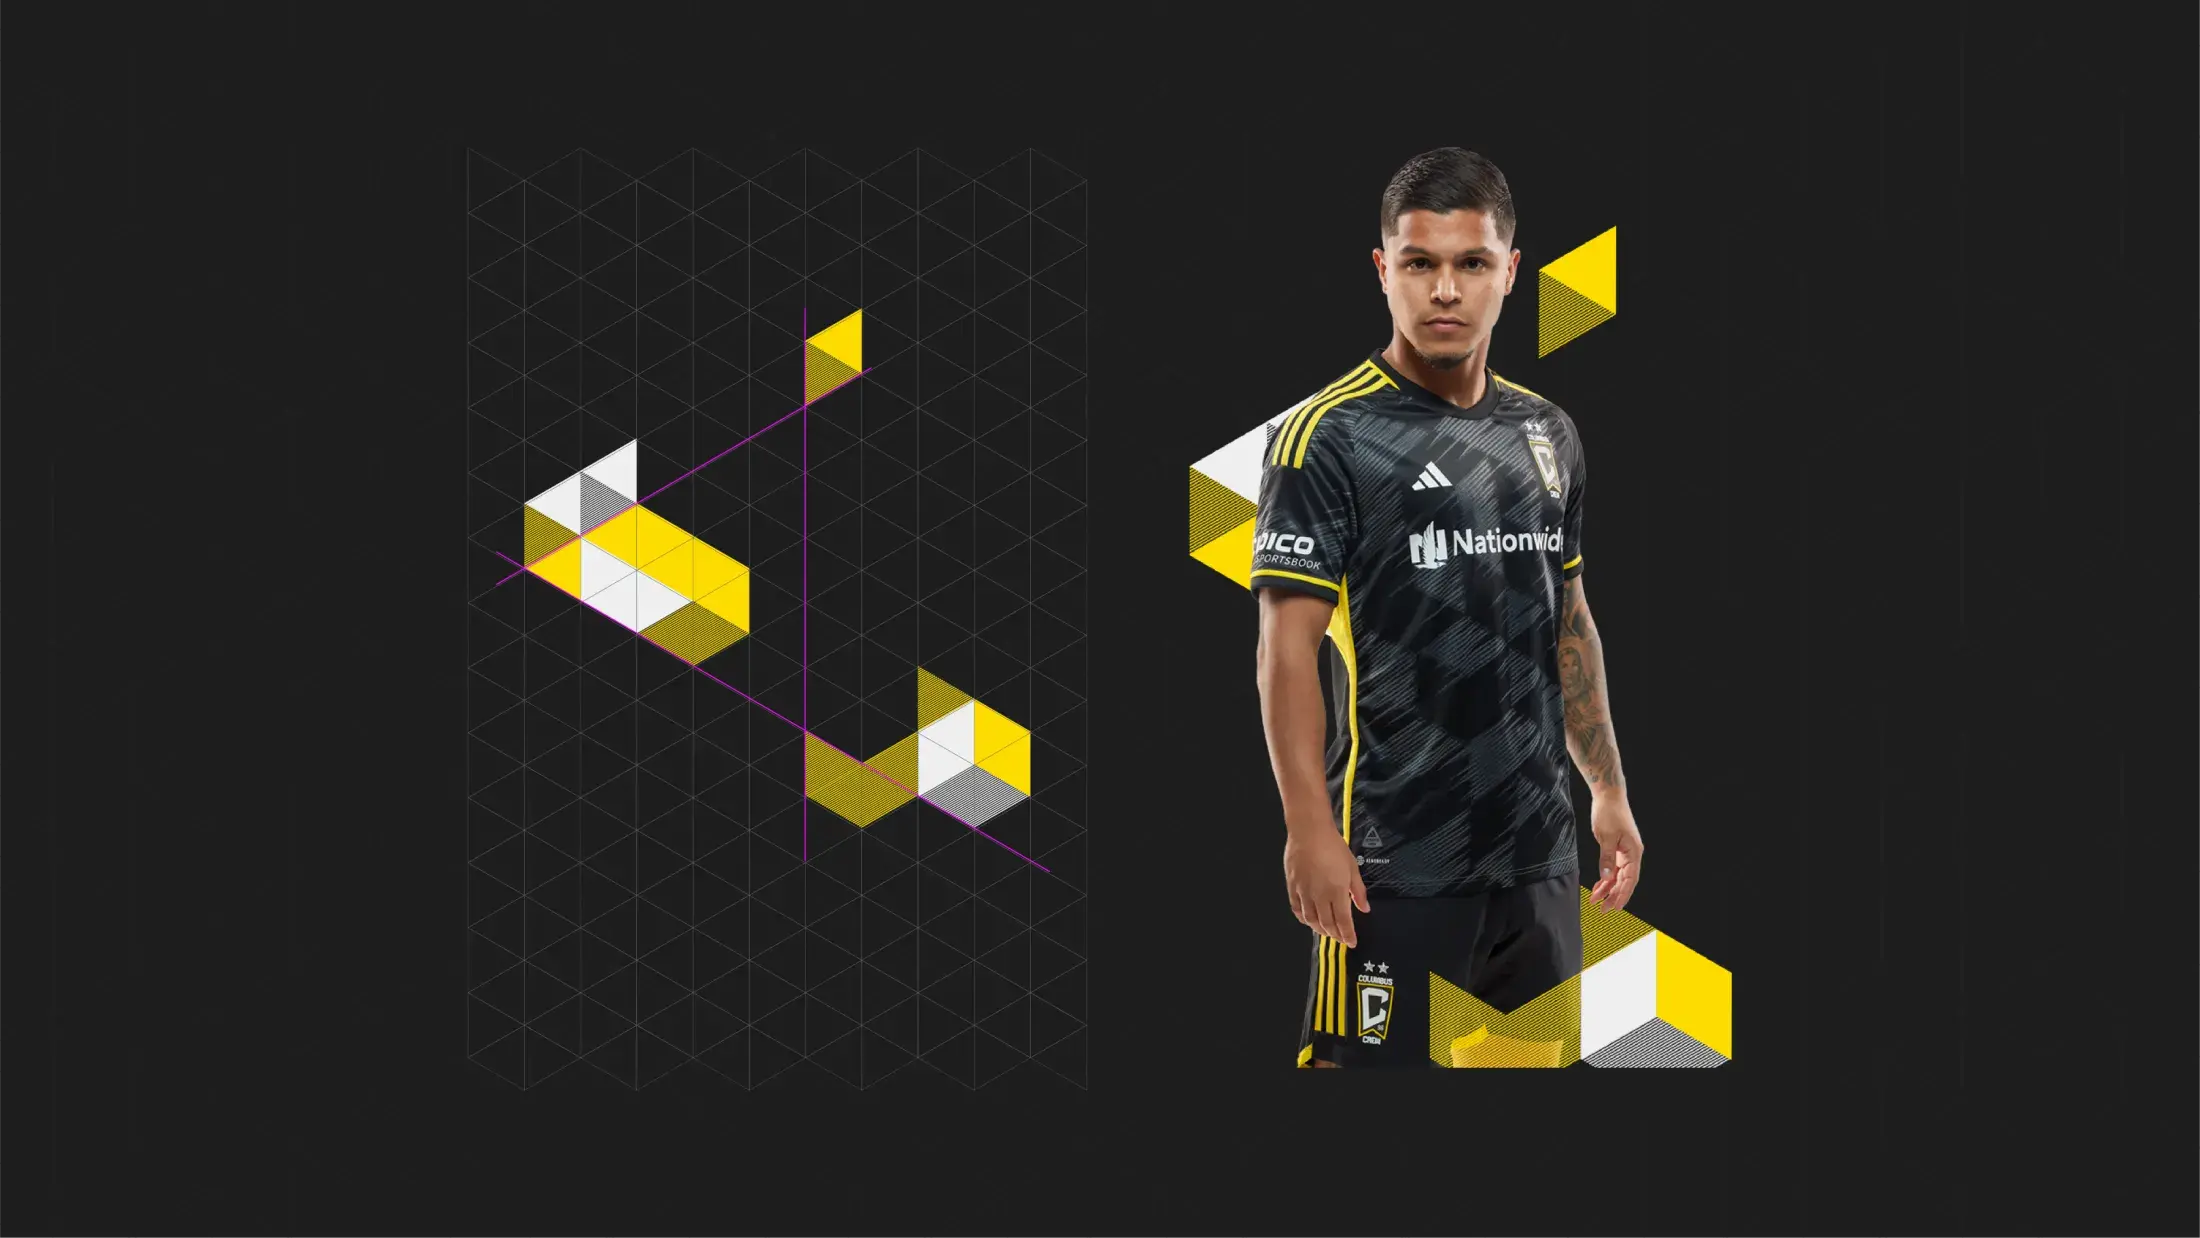 Crew player against a black background with branded shapes surrounding